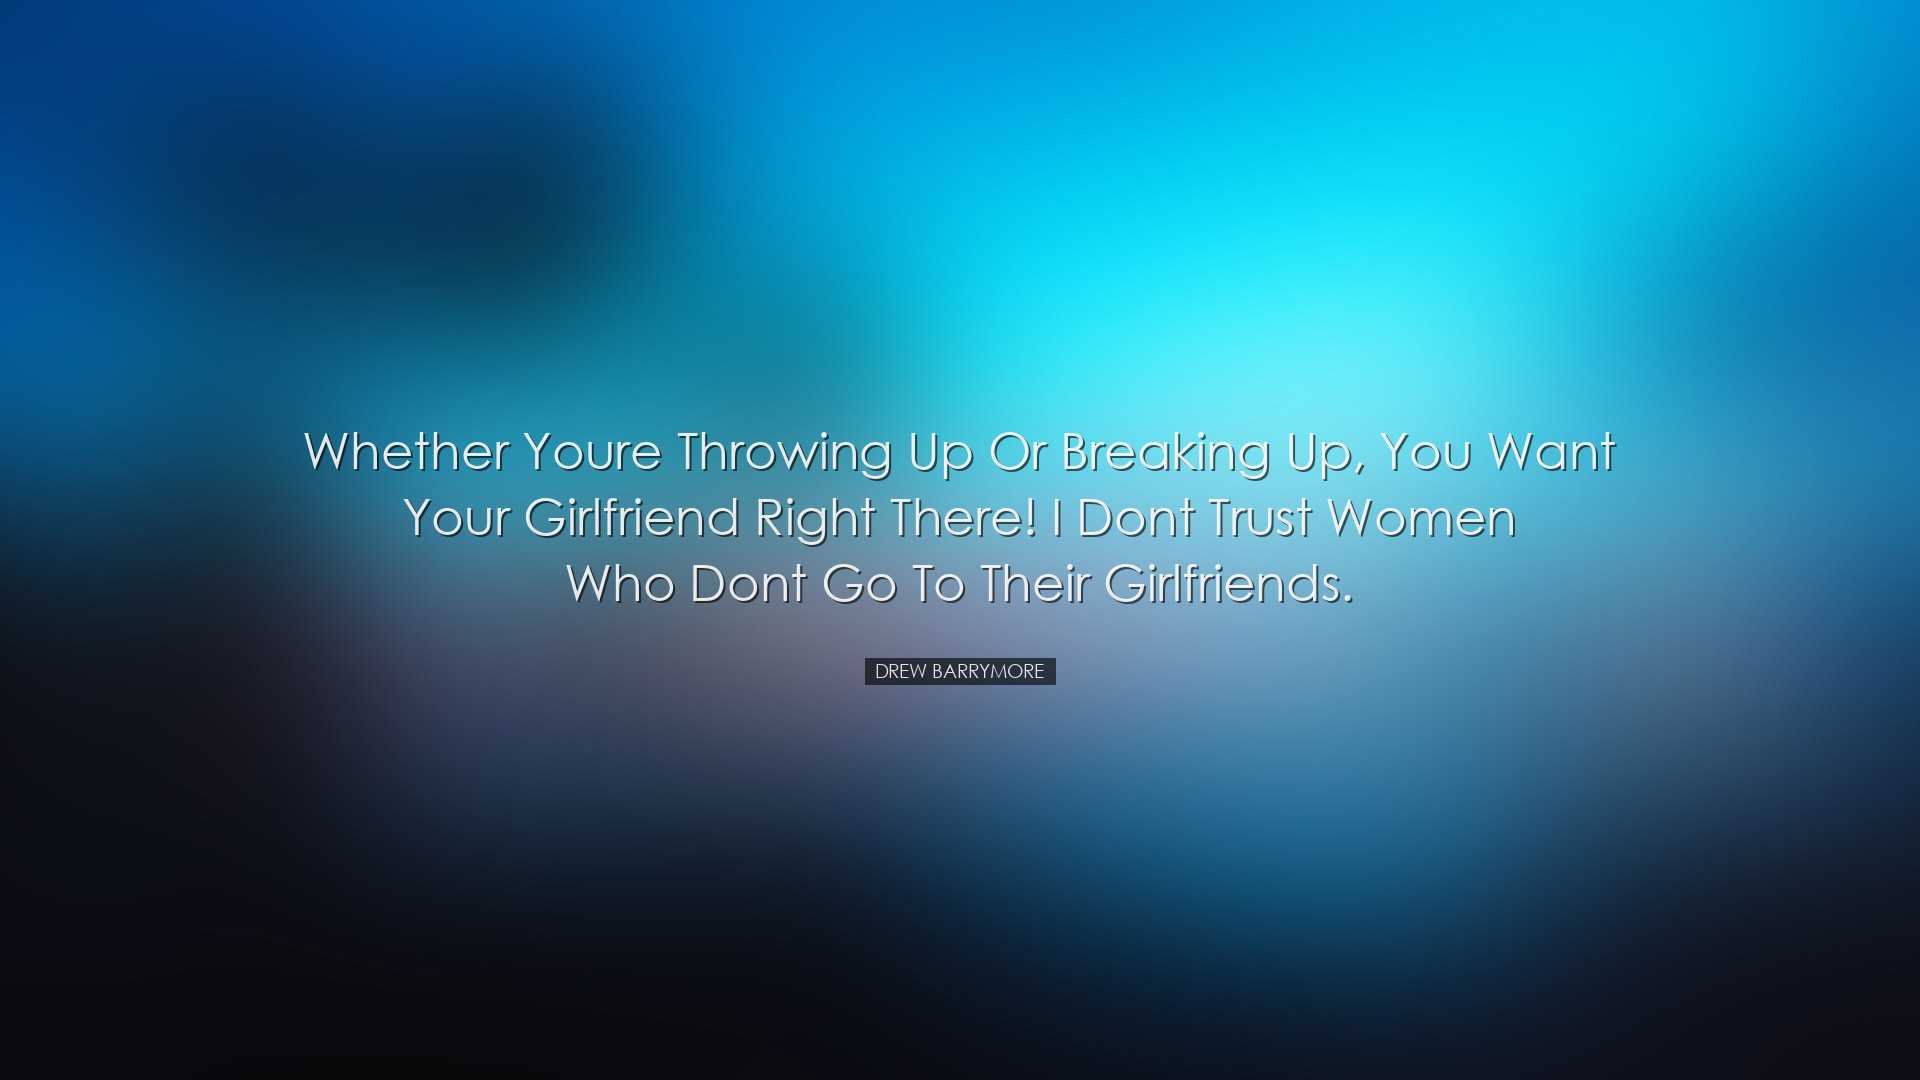 Whether youre throwing up or breaking up, you want your girlfriend